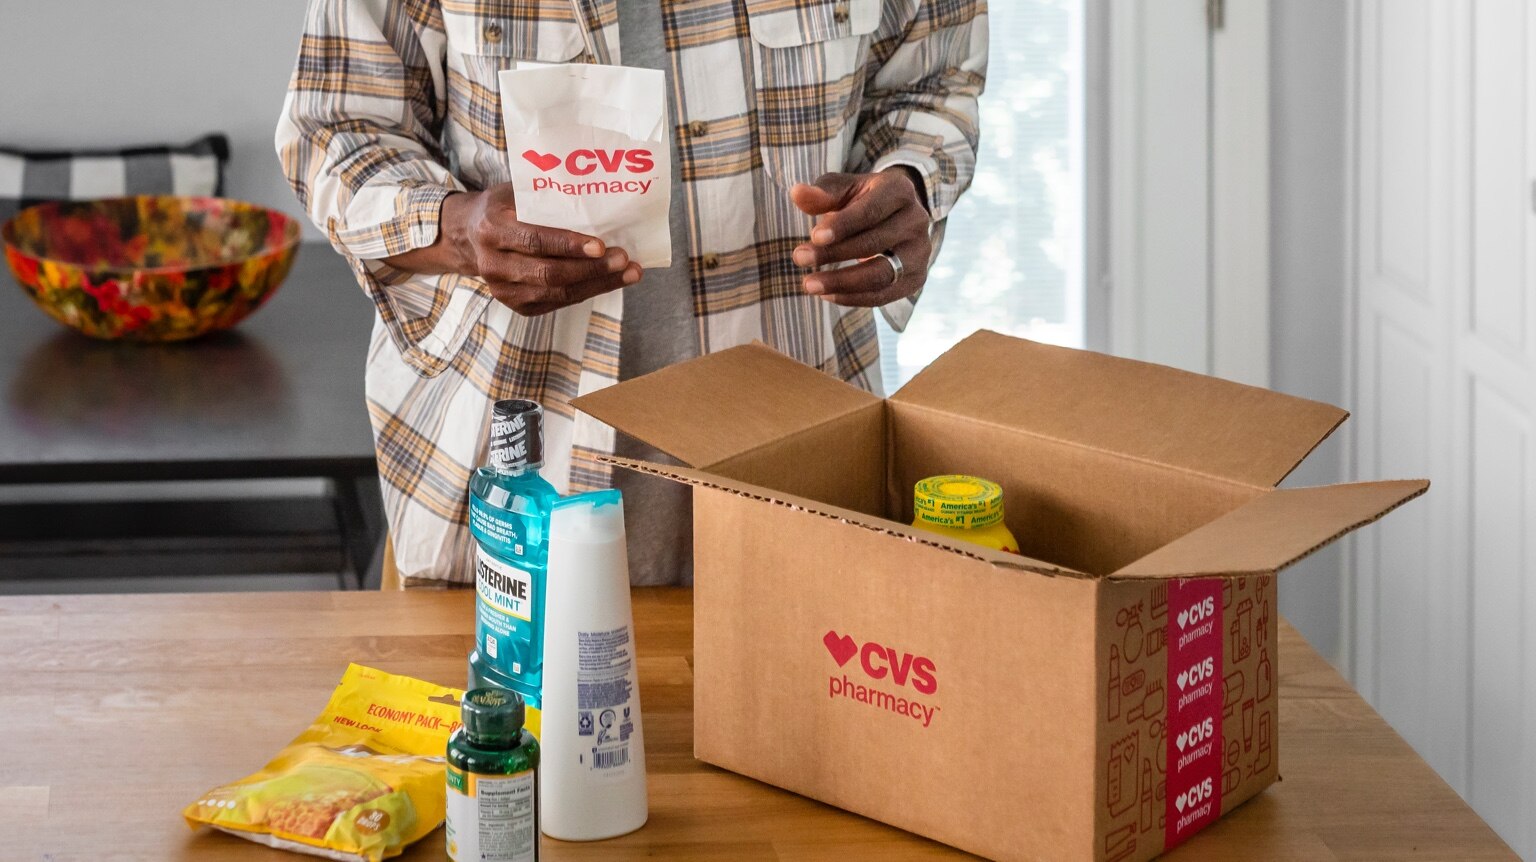 Man at home opening a CVS delivery box with everyday items and prescriptions